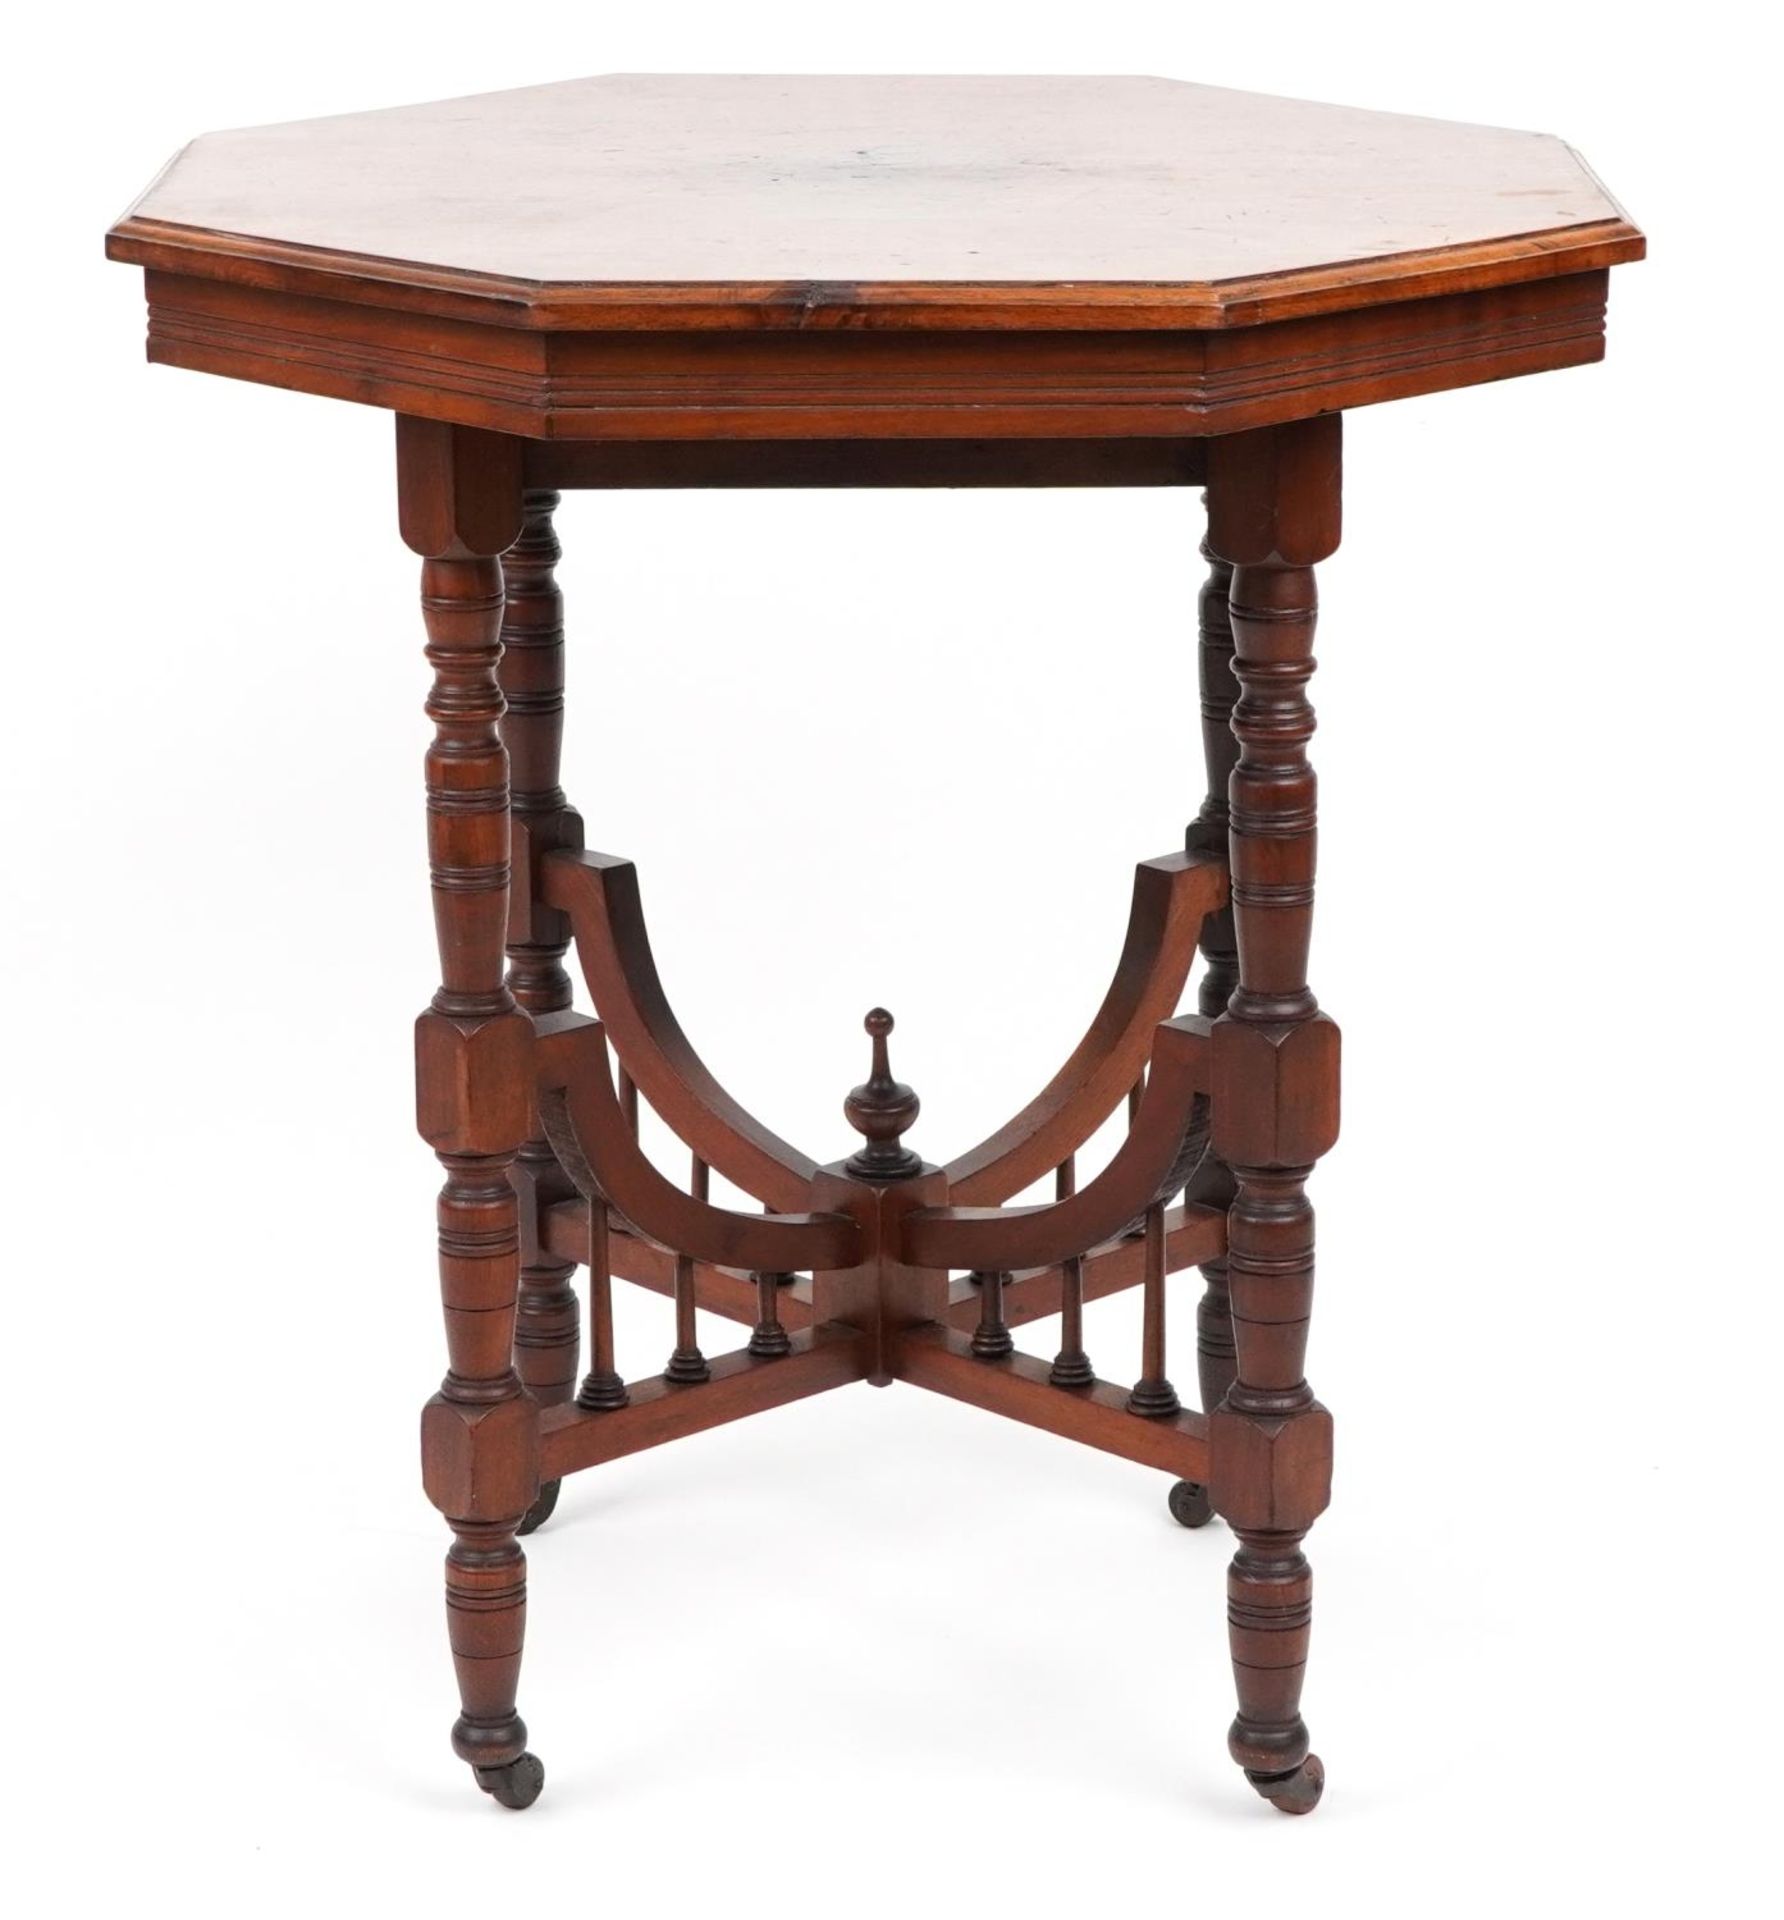 Aesthetic style mahogany octagonal centre table, 72.5cm high x 72cm in diameter : For further - Image 3 of 4